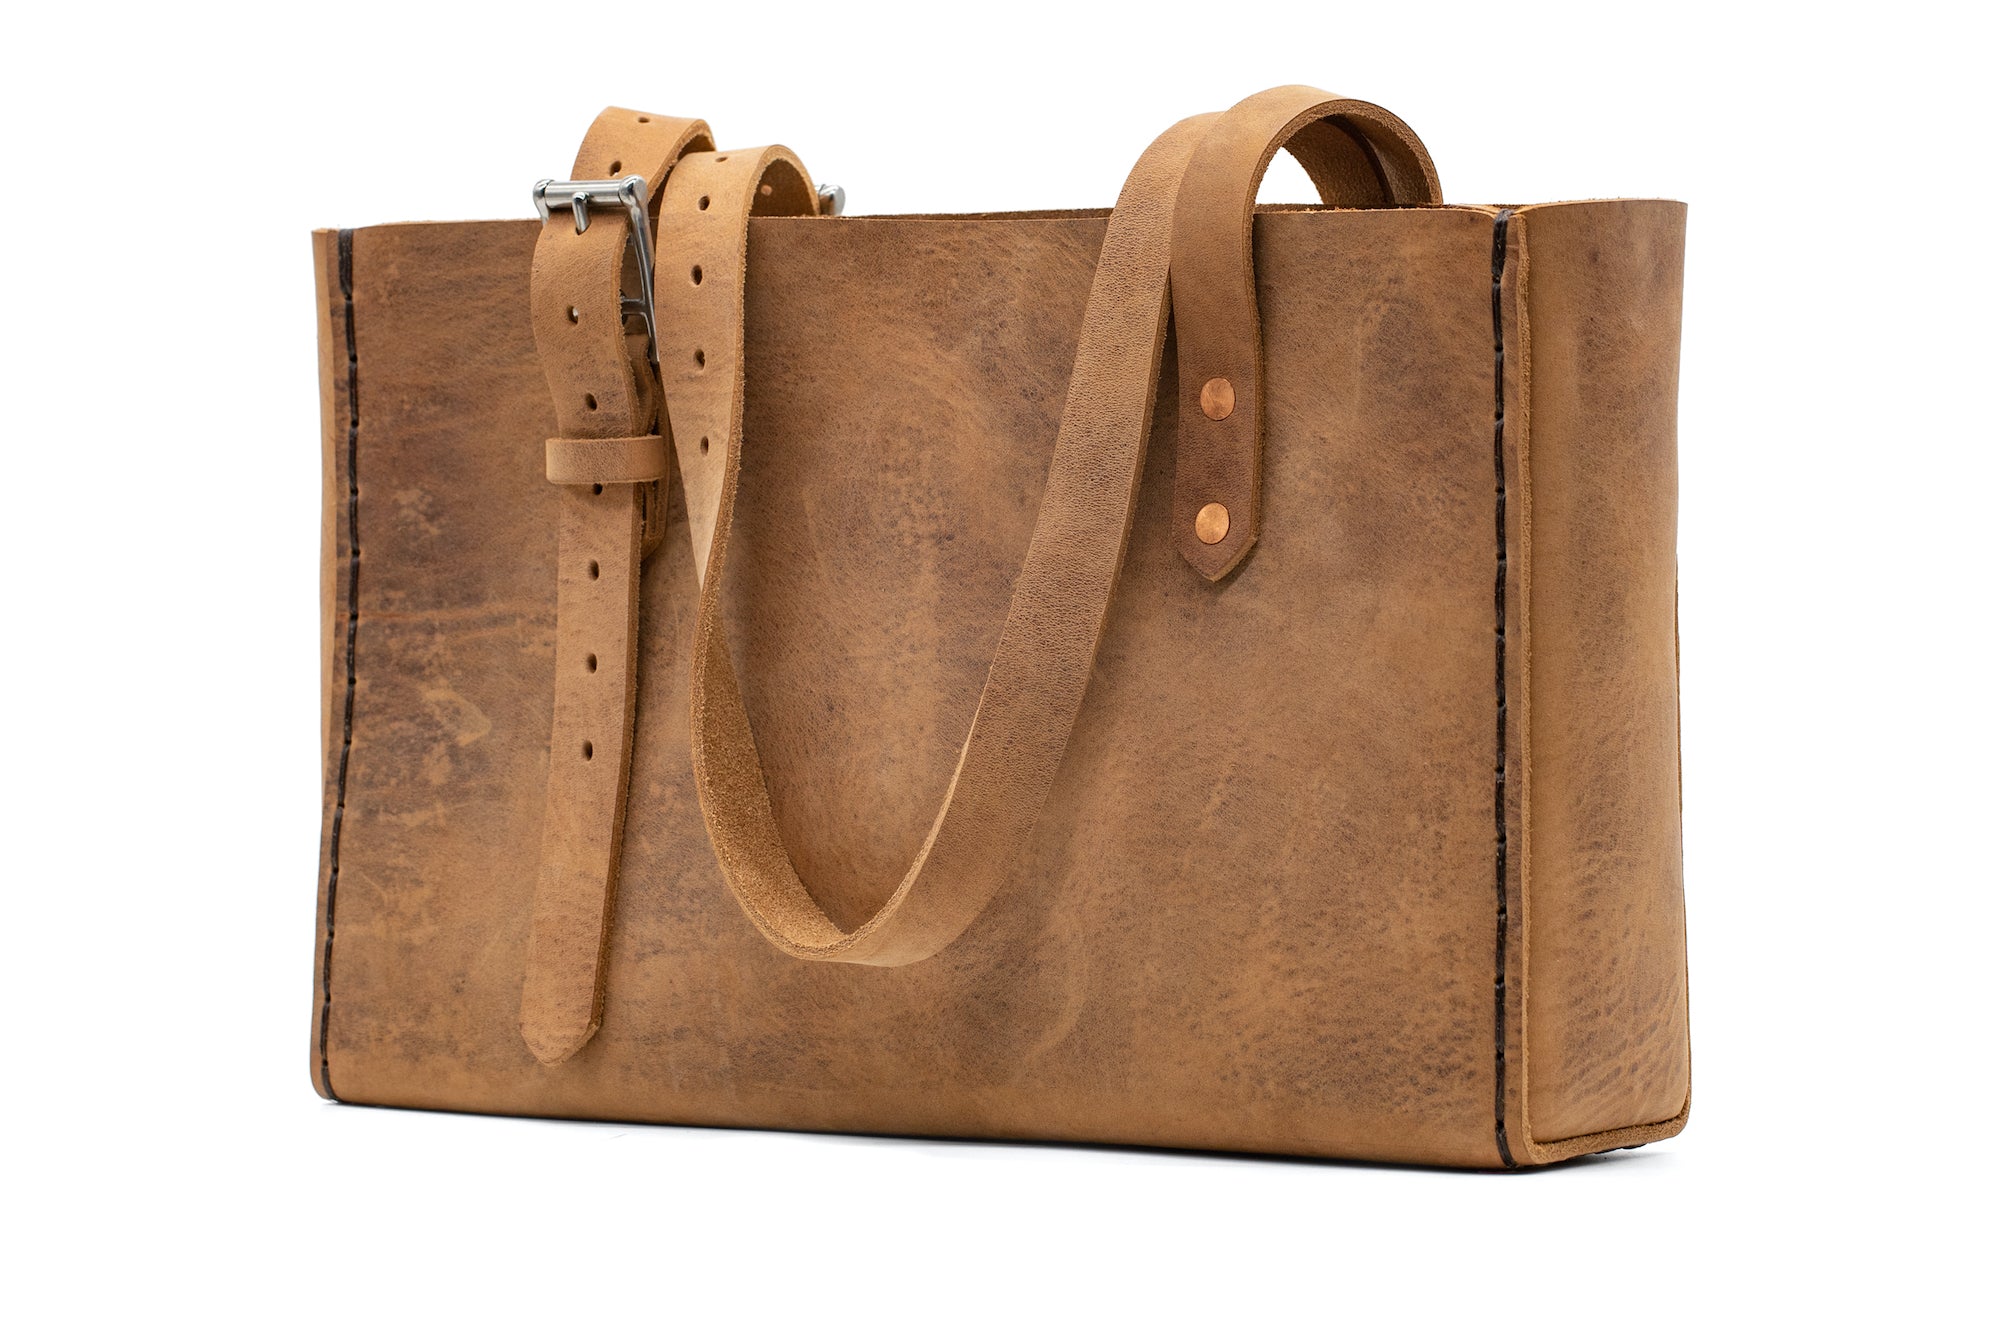 Limited Edition No. 714 Tote in Pecan Cream - ONLY 1 MADE